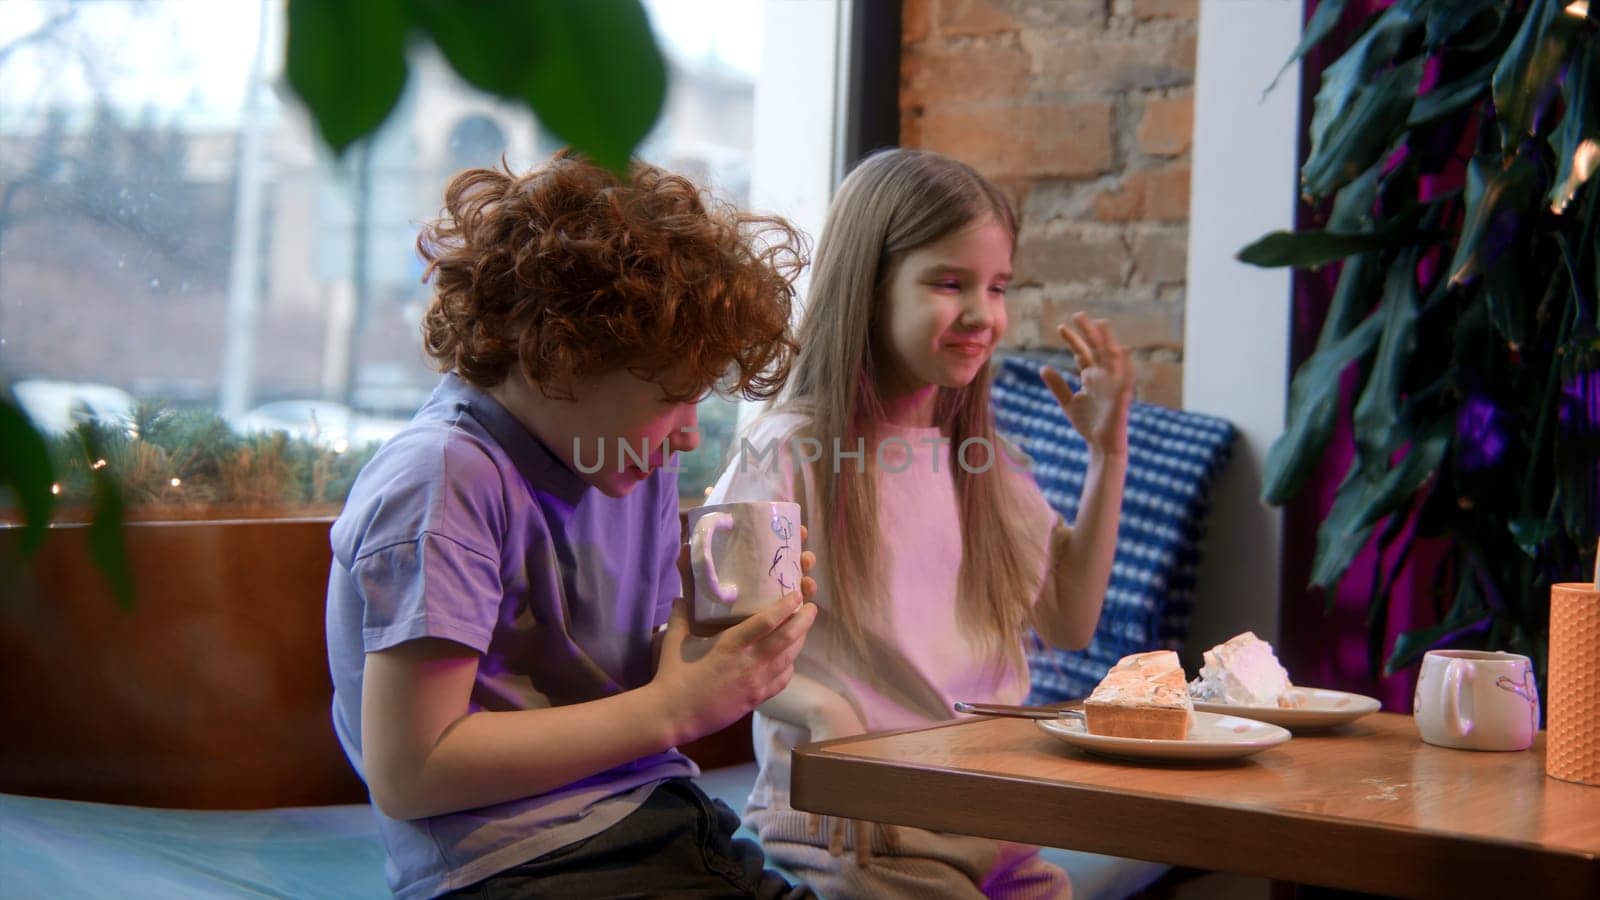 Kids playing with a dog toy at a table cafe. Stock footage. Children having fun and holding a puppy toy